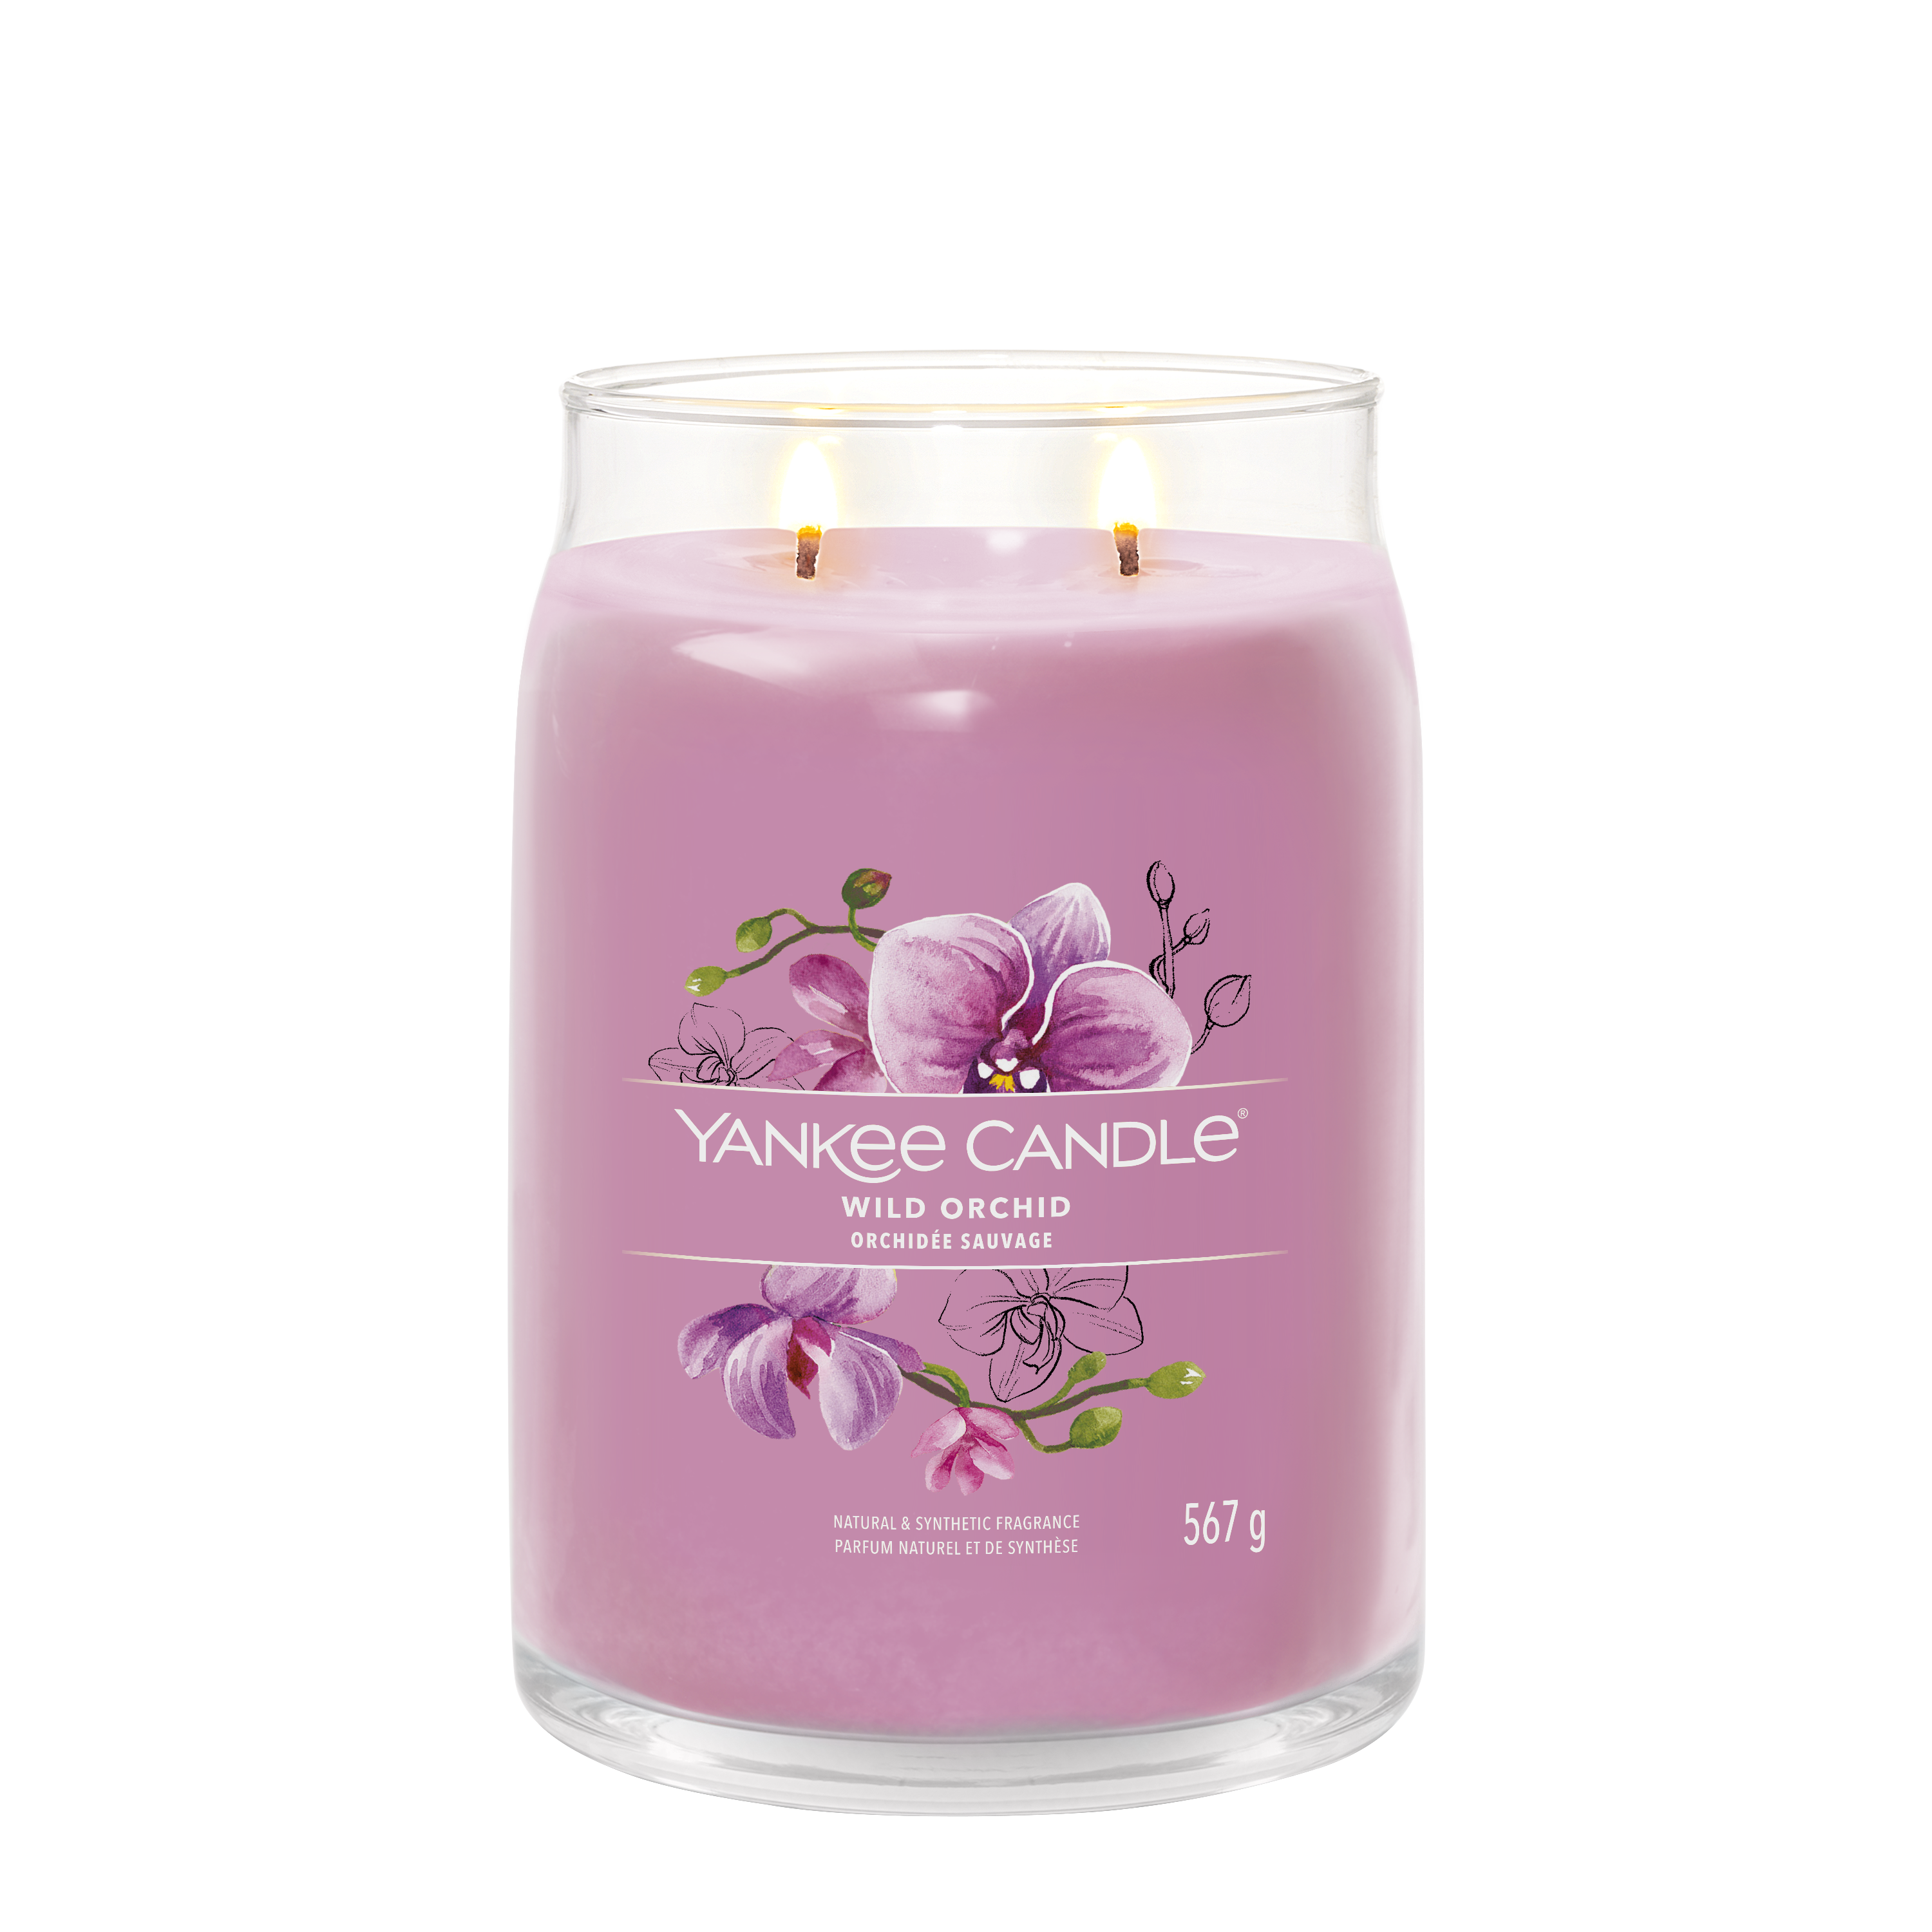 Yankee Candle Wild Orchid 567g